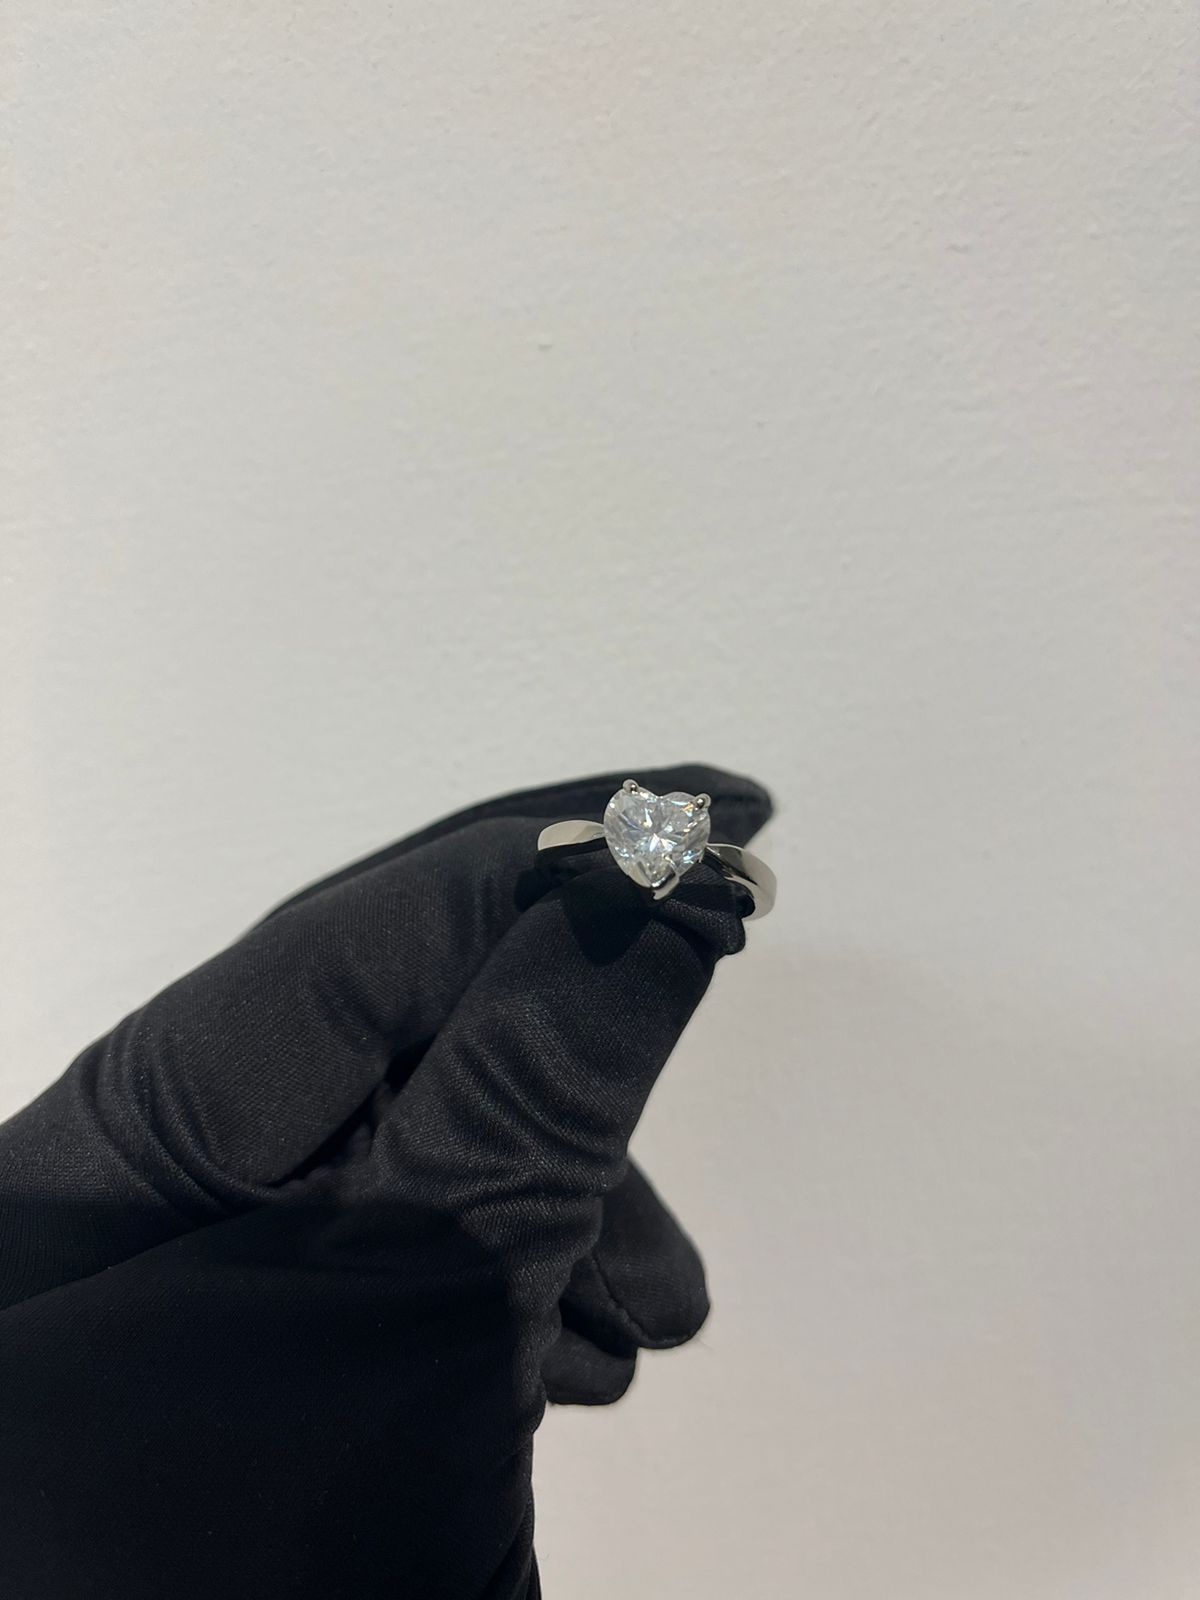 2.5 Carat Heart Moissanite Lab Diamond Ring in 925 Silver ( 18KT White Gold Plated)